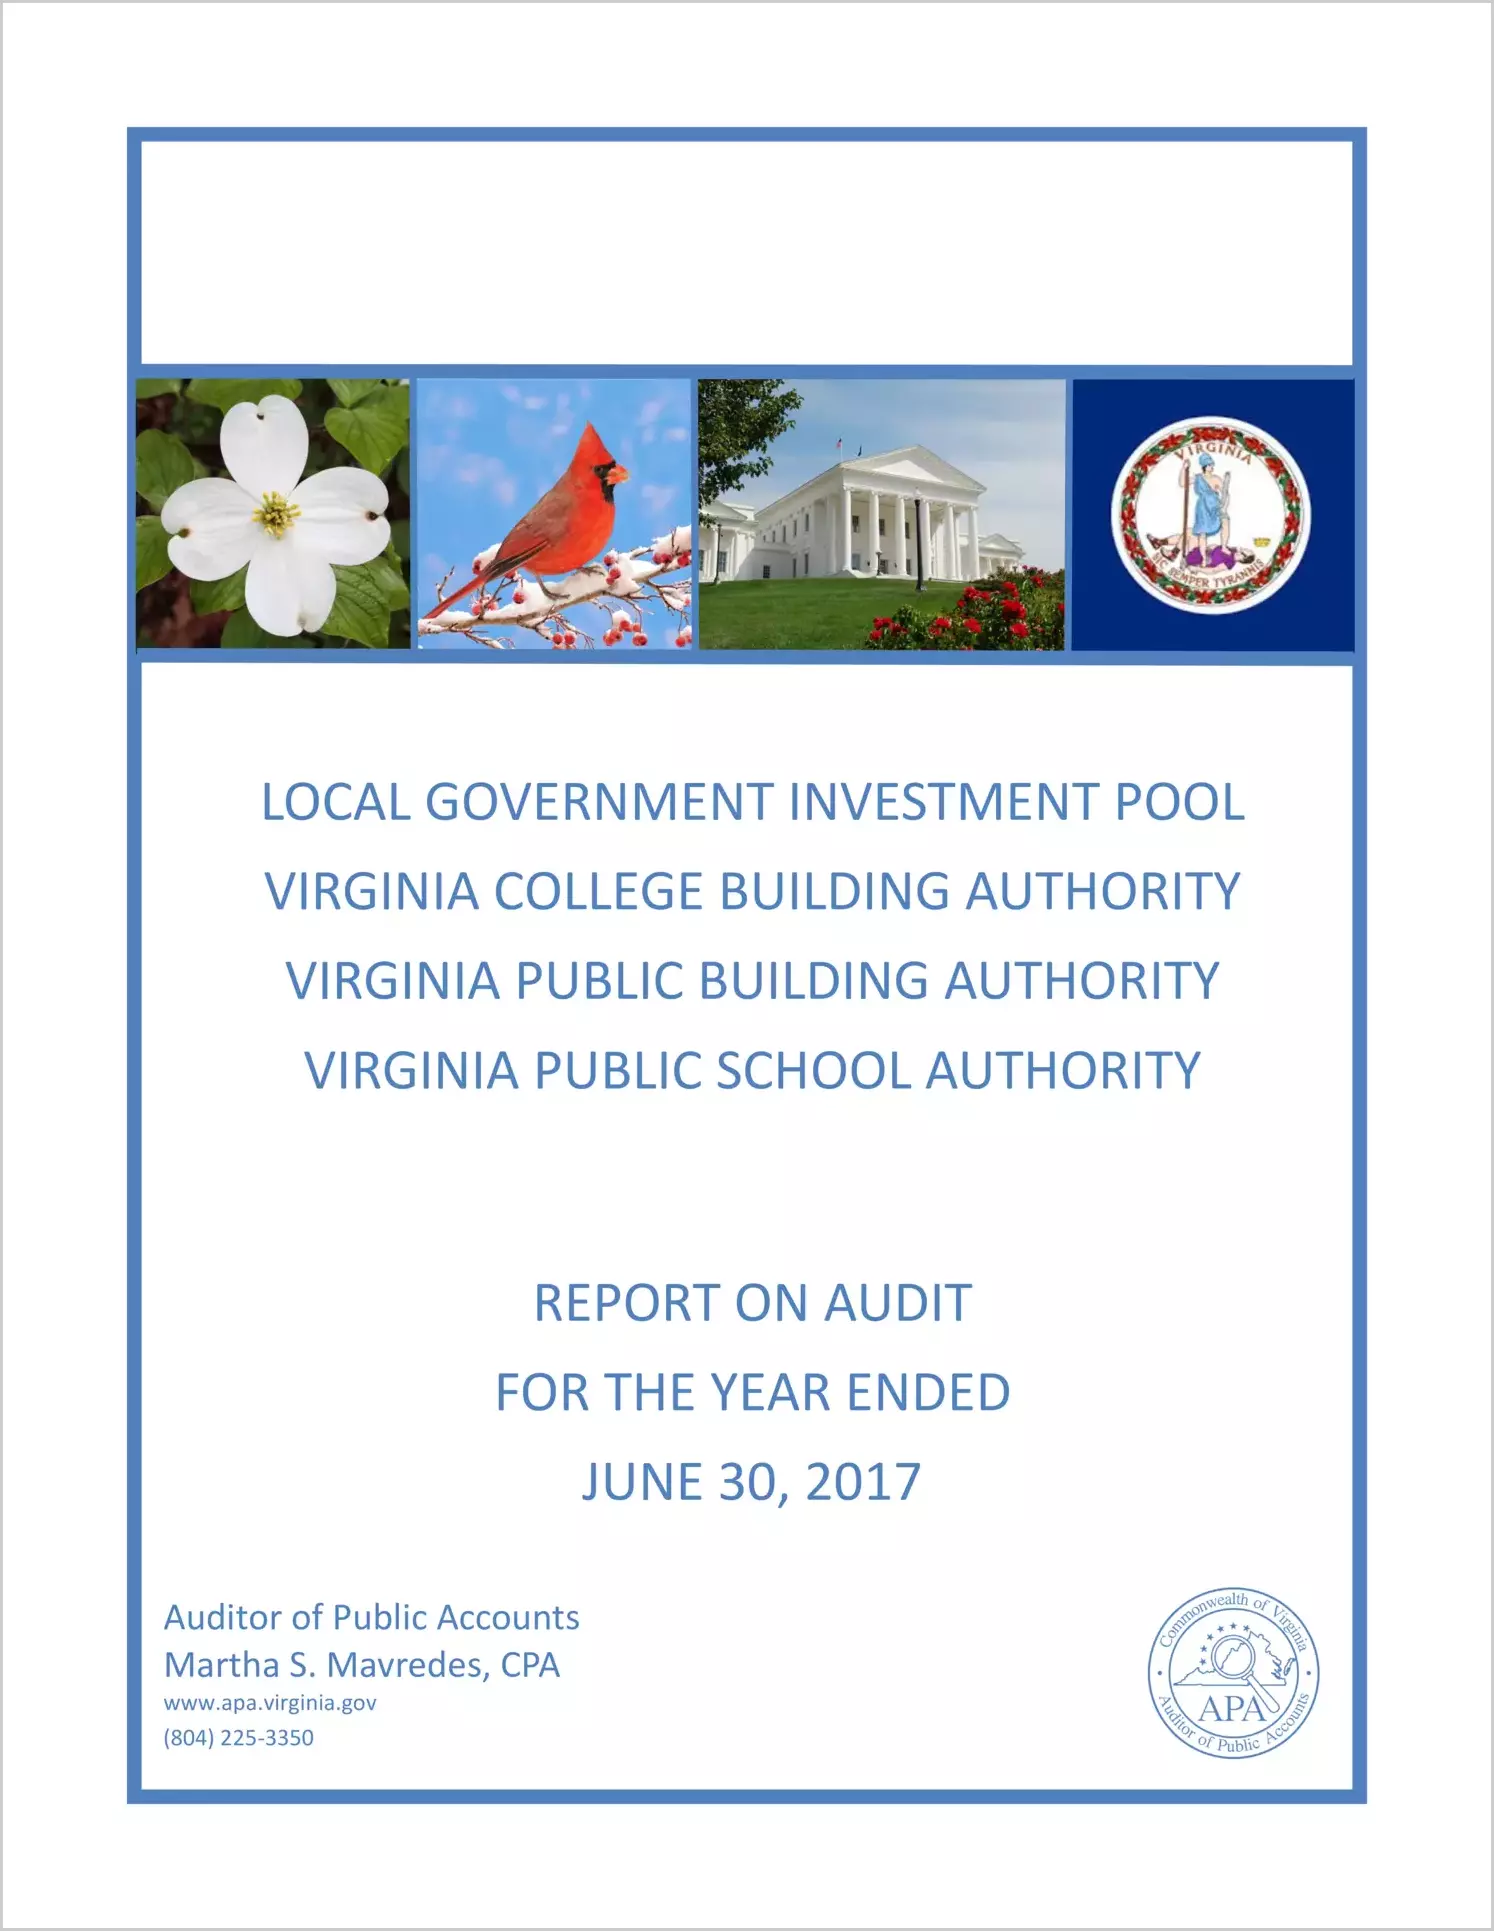 Local Government Investment Pool, Virginia College Building Authority, Virginia Public Building Authority, Virginia Public School Authority for the year ended June 30, 2017